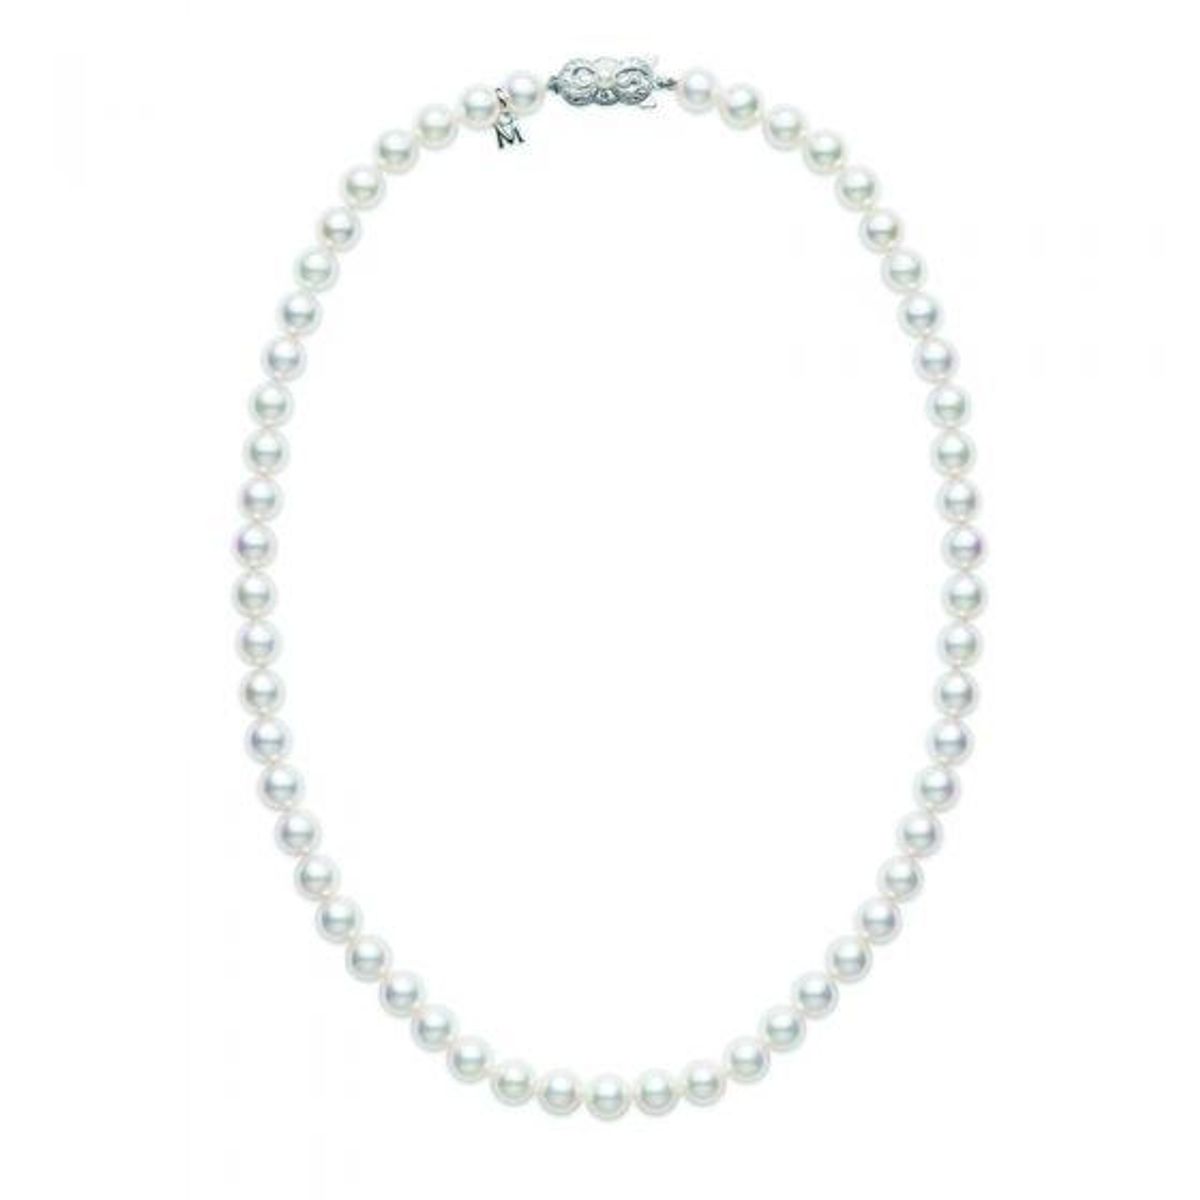 16” Akoya Cultured Pearl Strand Necklace